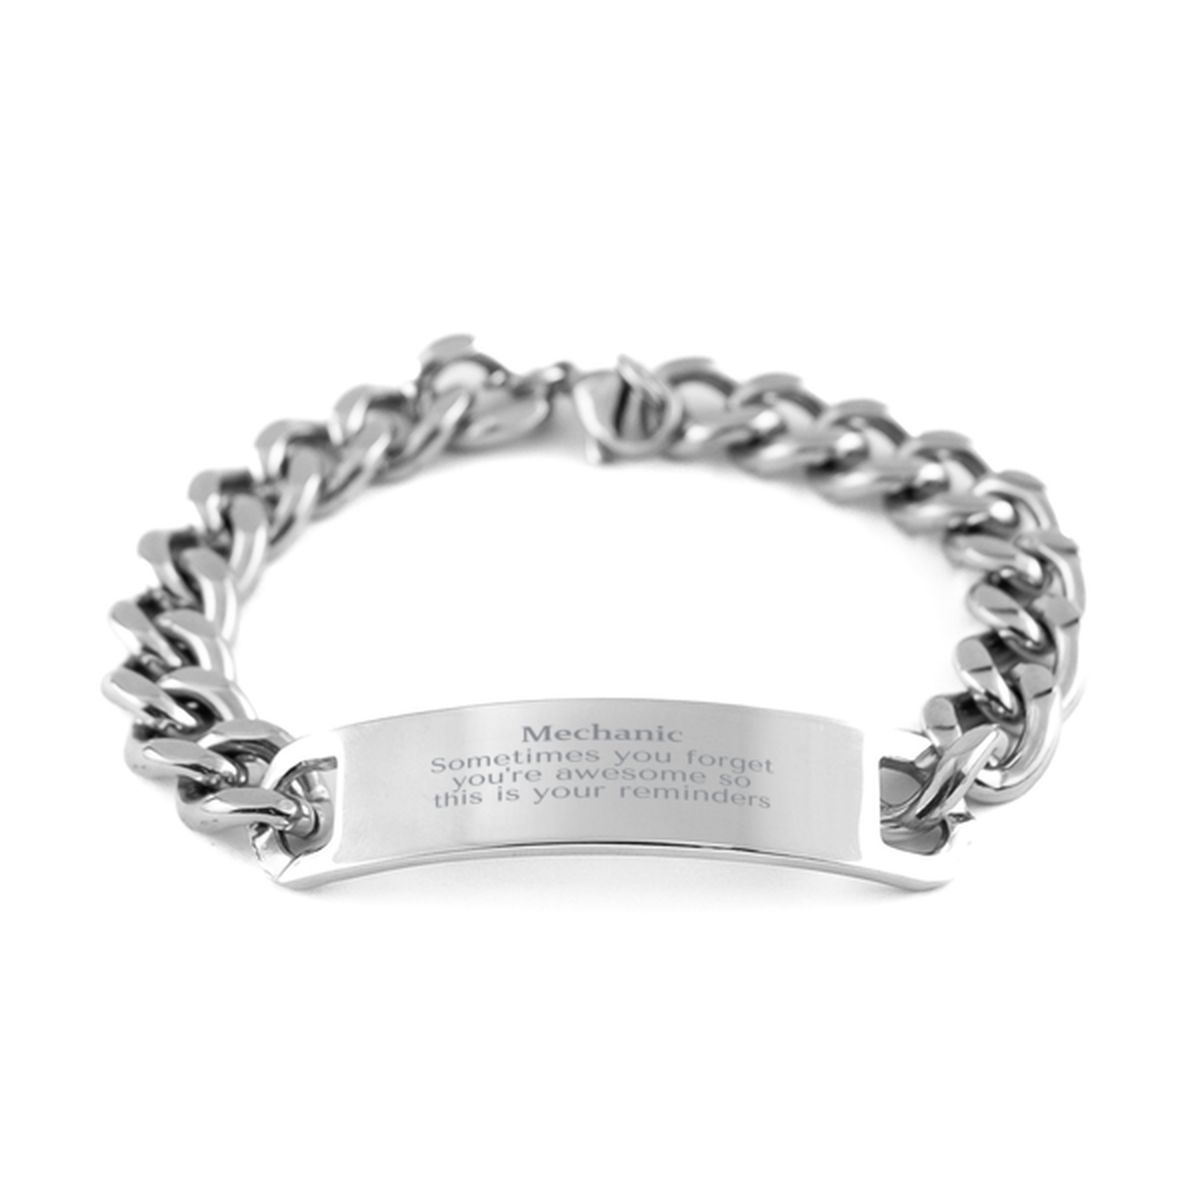 Sentimental Mechanic Cuban Chain Stainless Steel Bracelet, Mechanic Sometimes you forget you're awesome so this is your reminders, Graduation Christmas Birthday Gifts for Mechanic, Men, Women, Coworkers